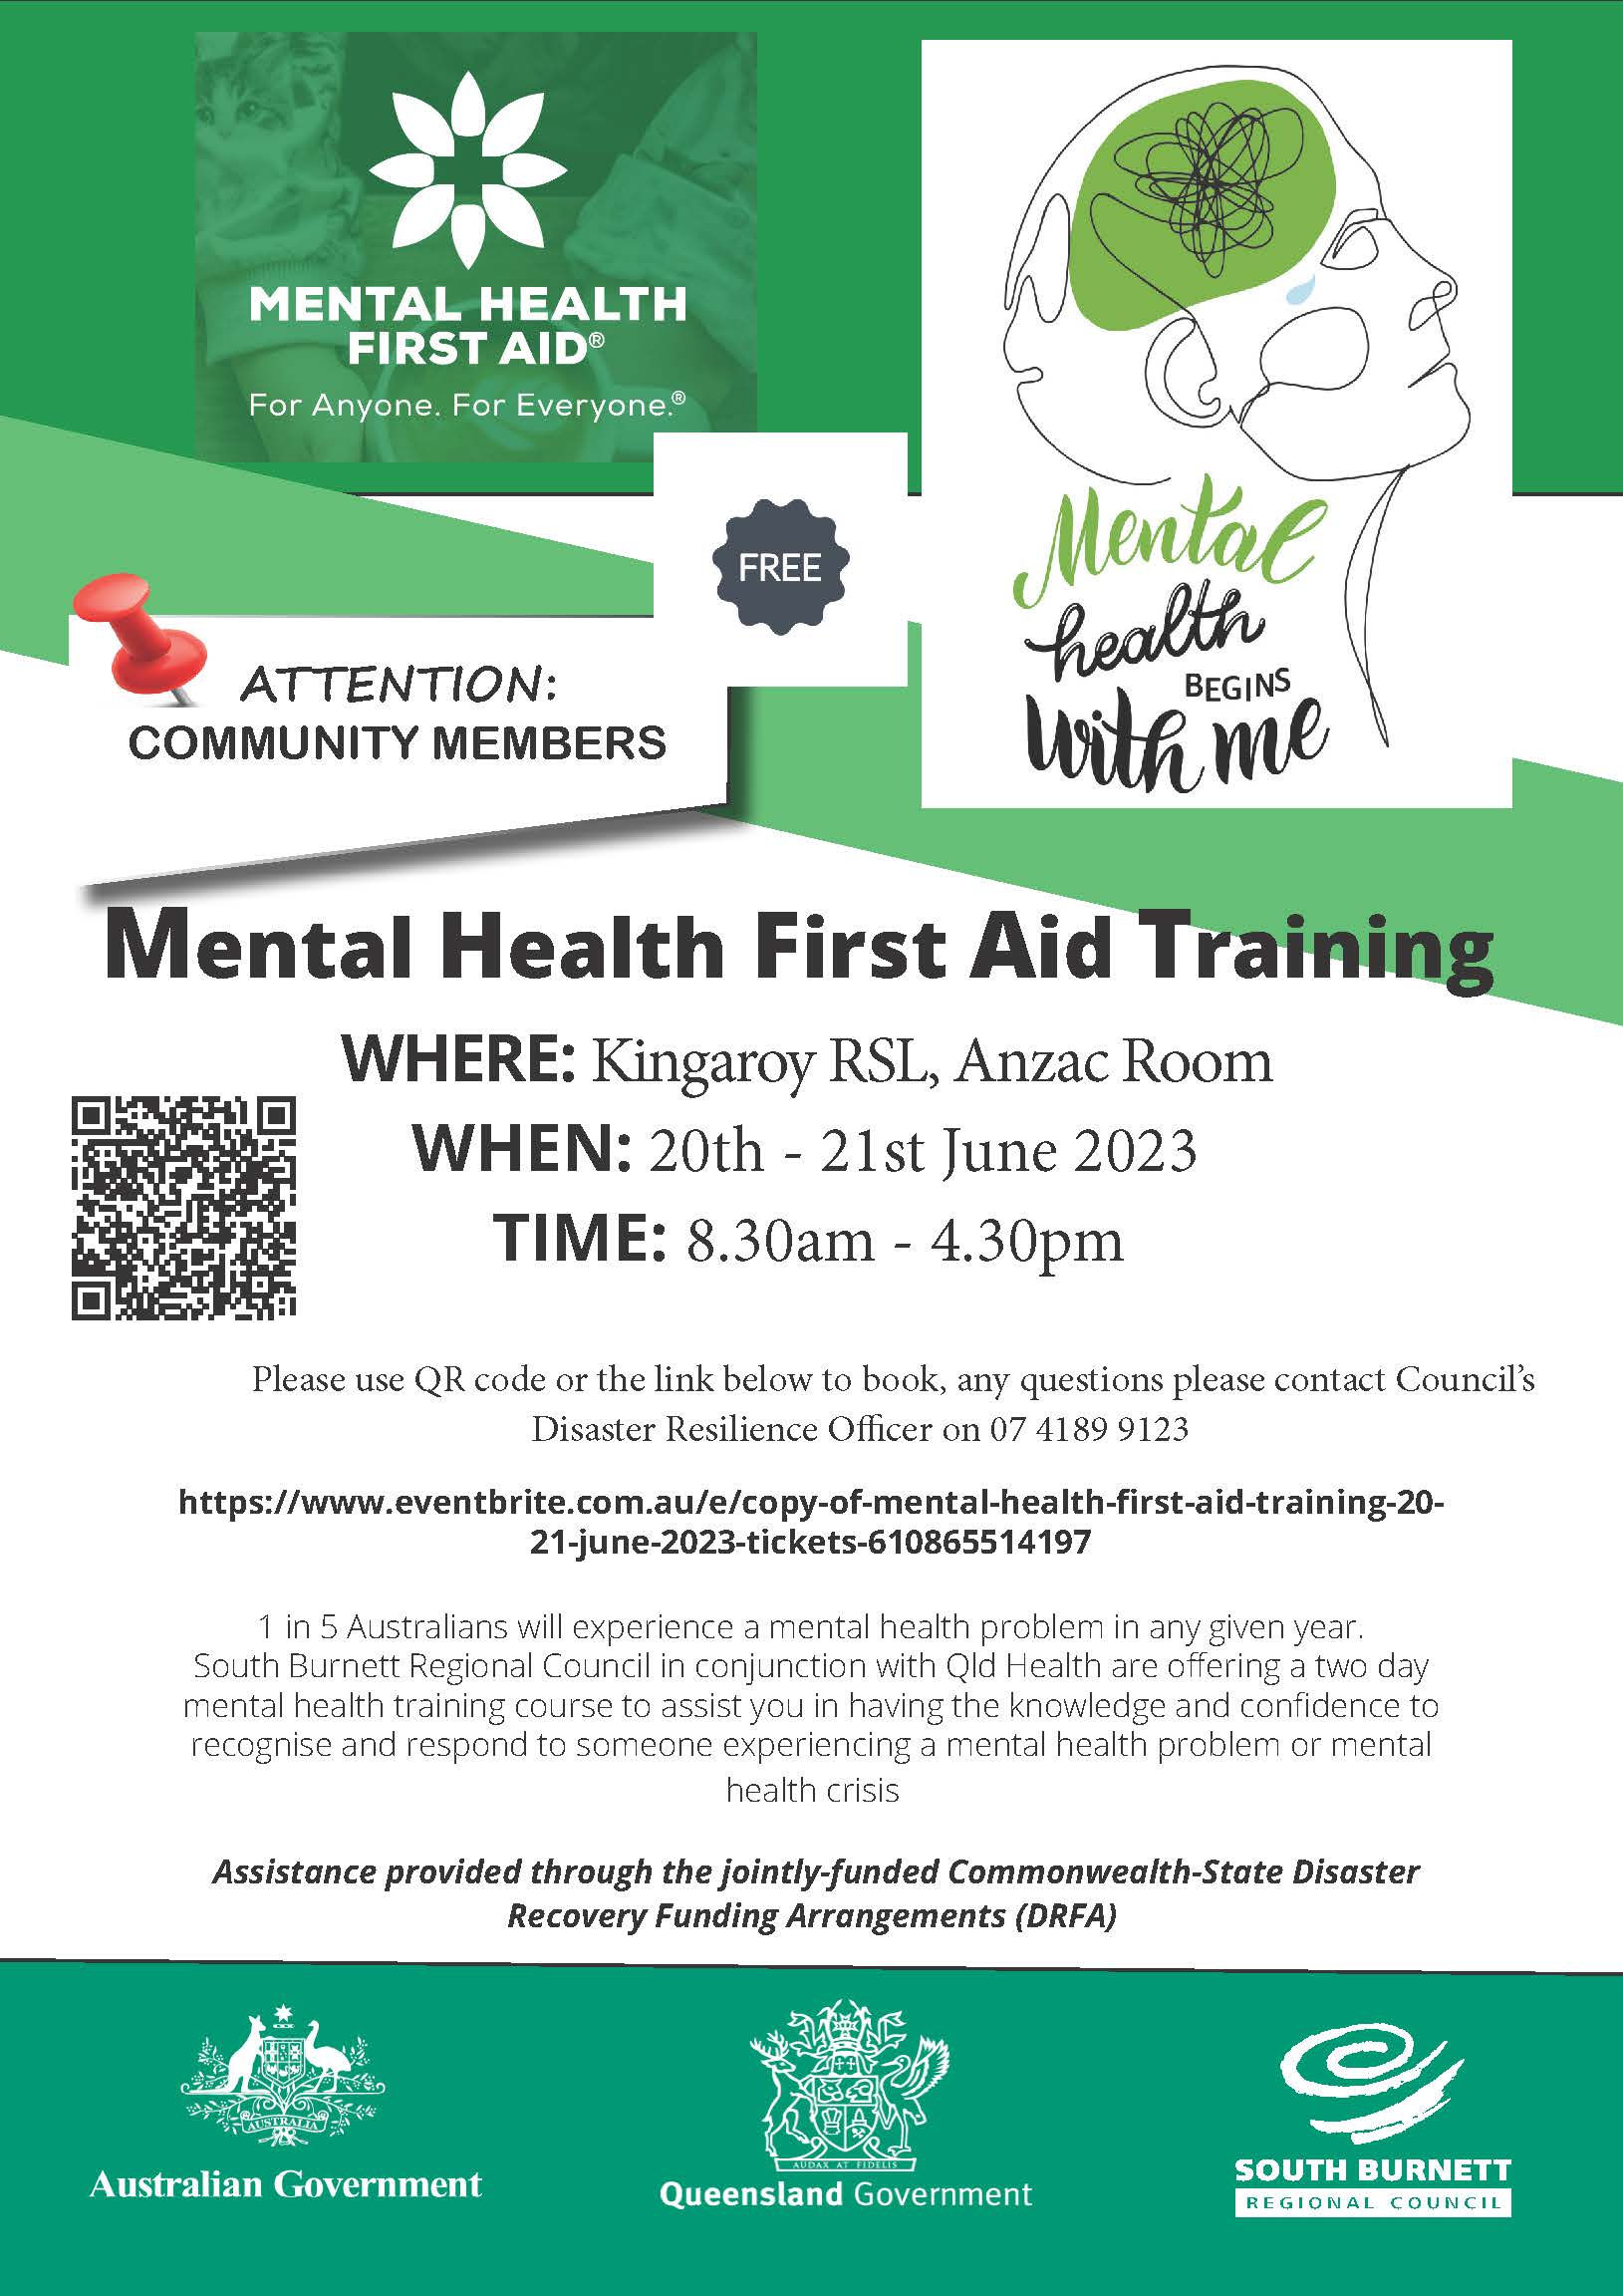 13 04 23 Mental health first aid training flyer june 2023